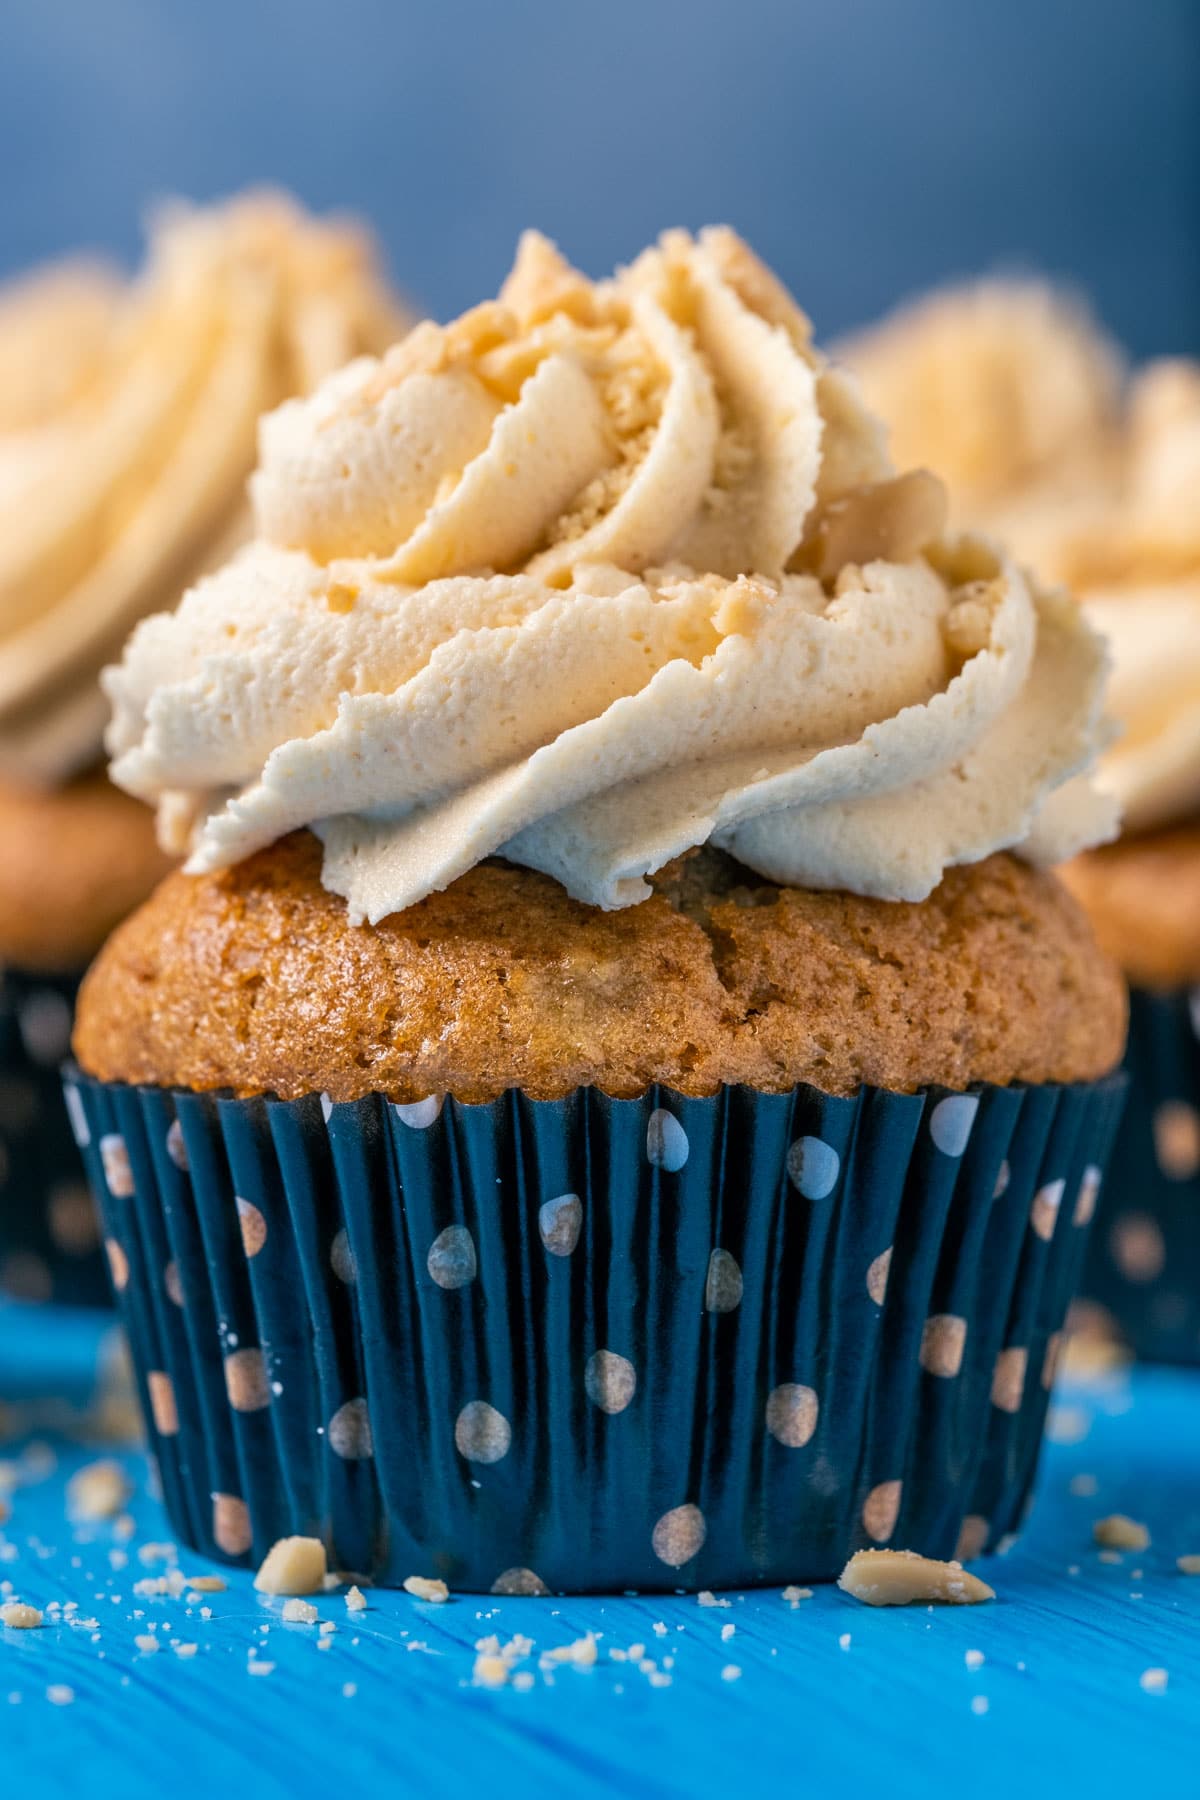 Vegan banana cupcakes topped with peanut butter frosting and crushed peanuts.